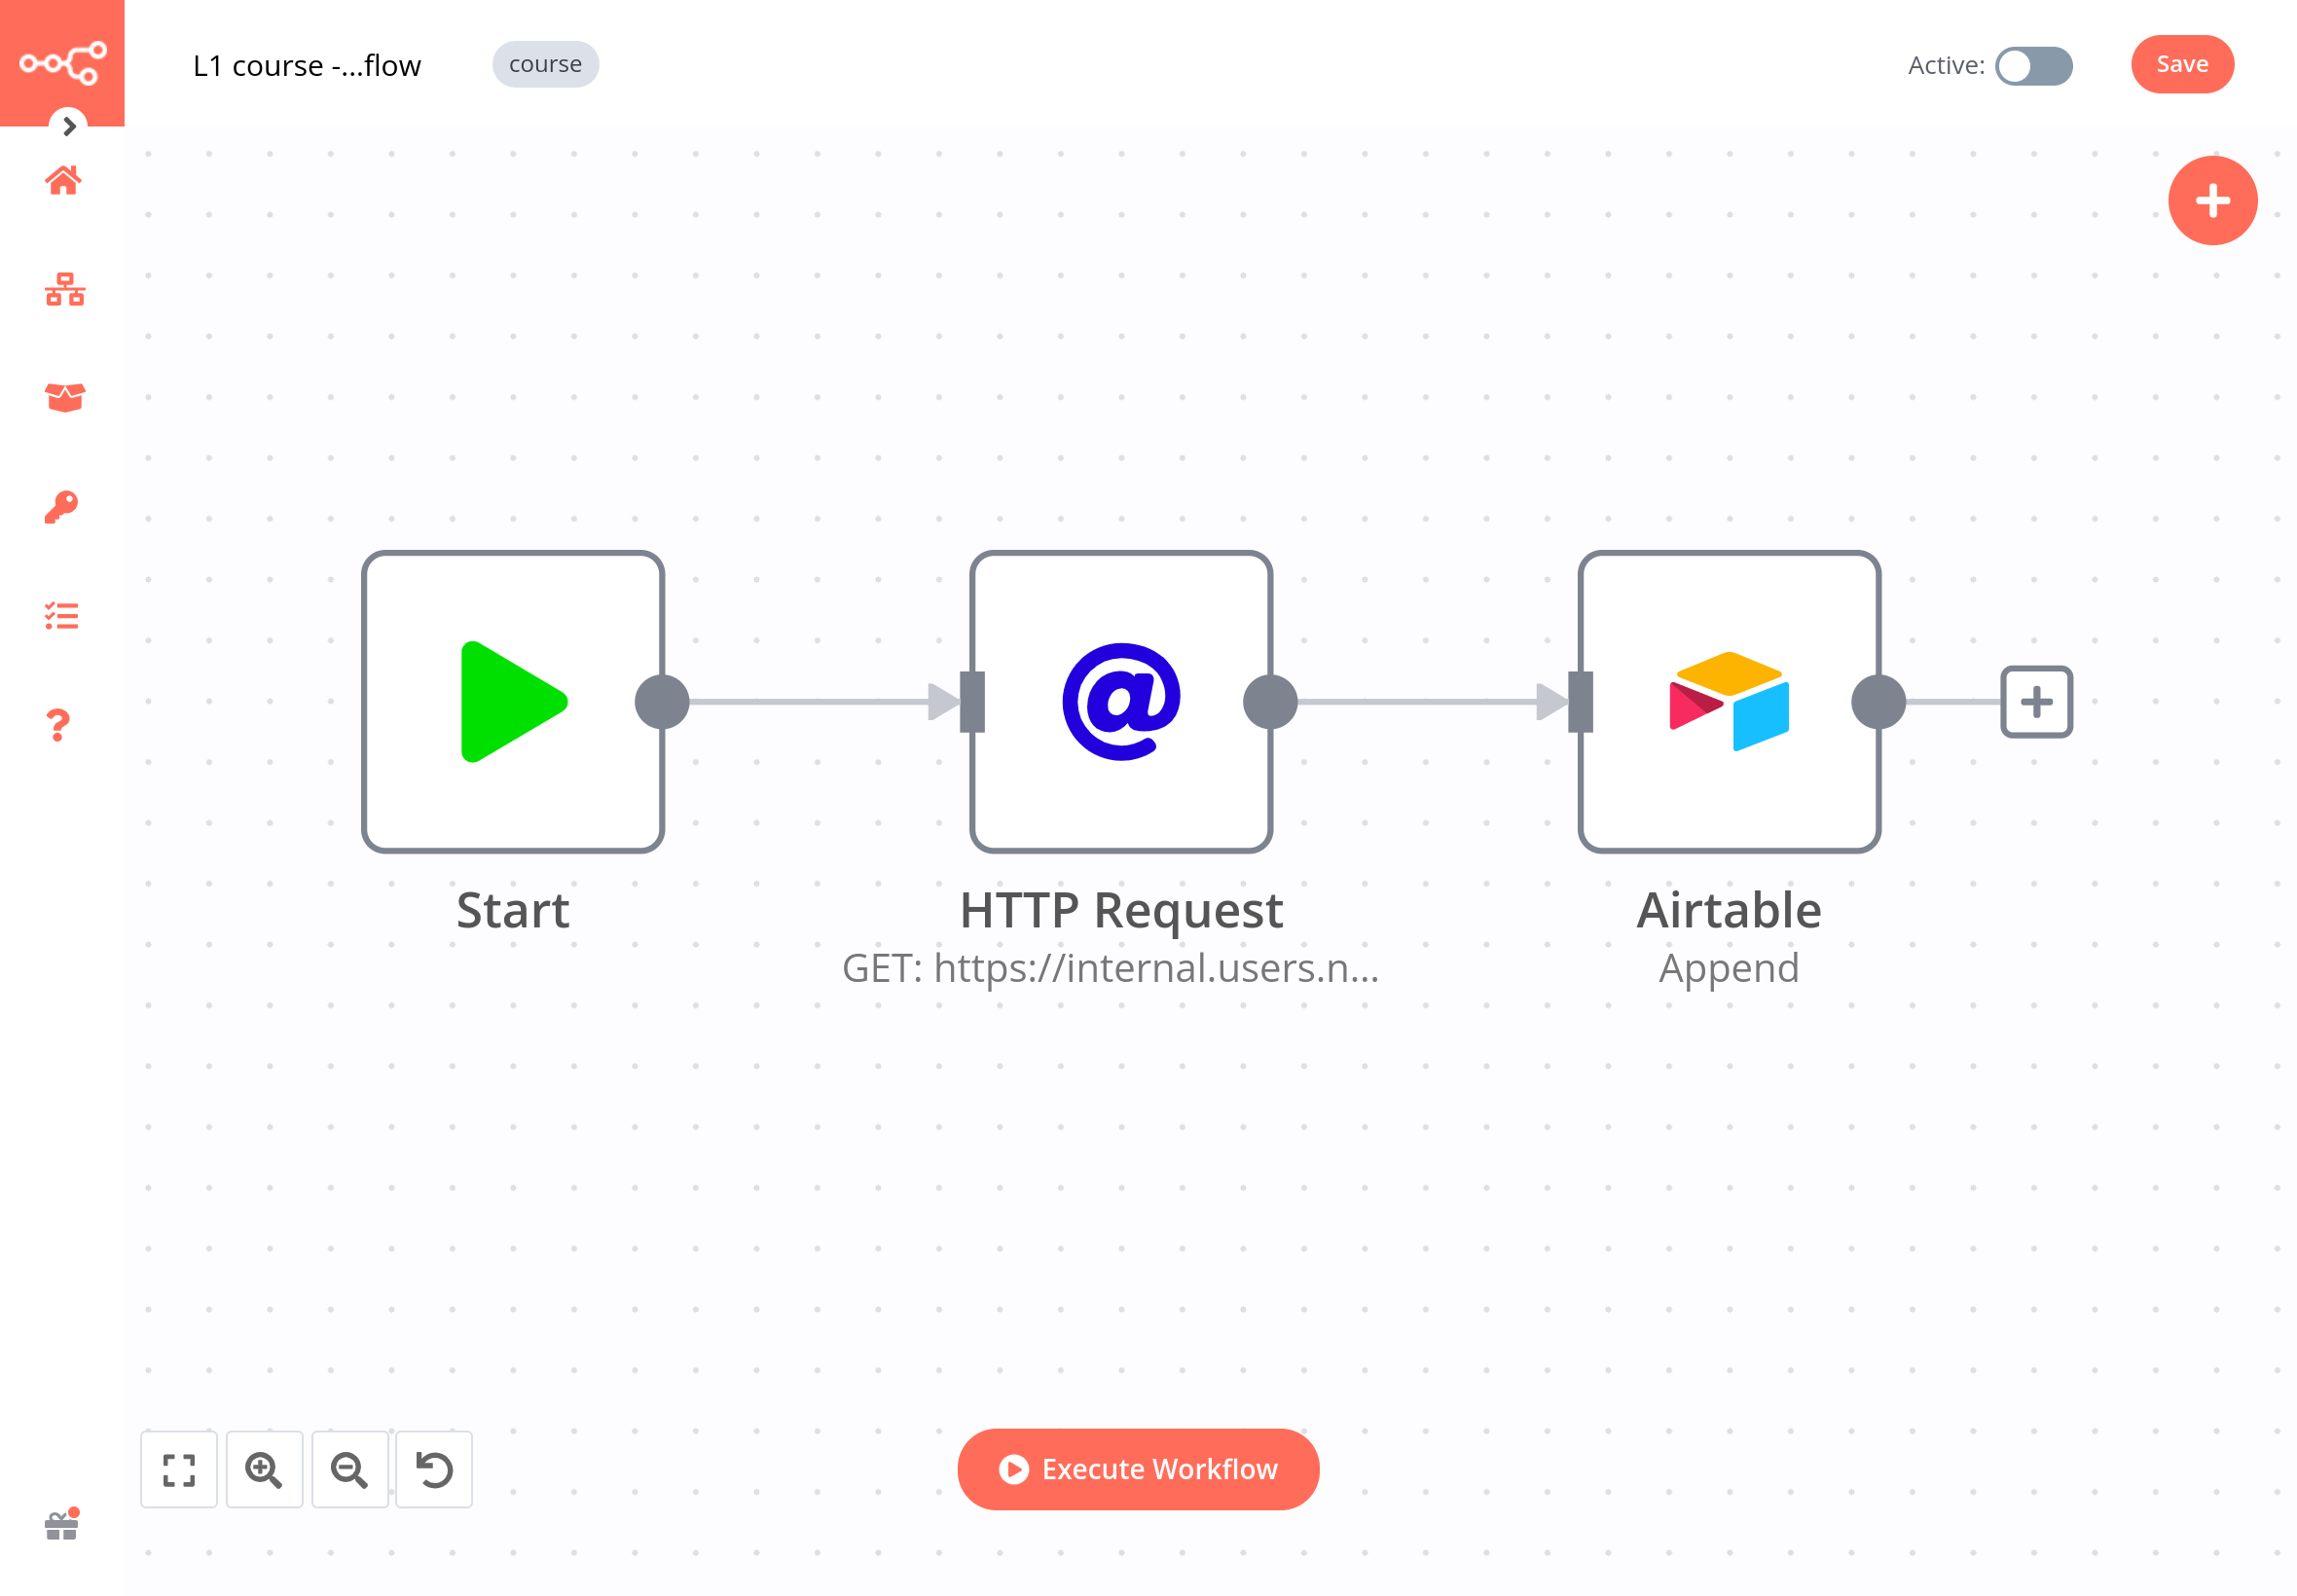 Workflow with the Airtable node